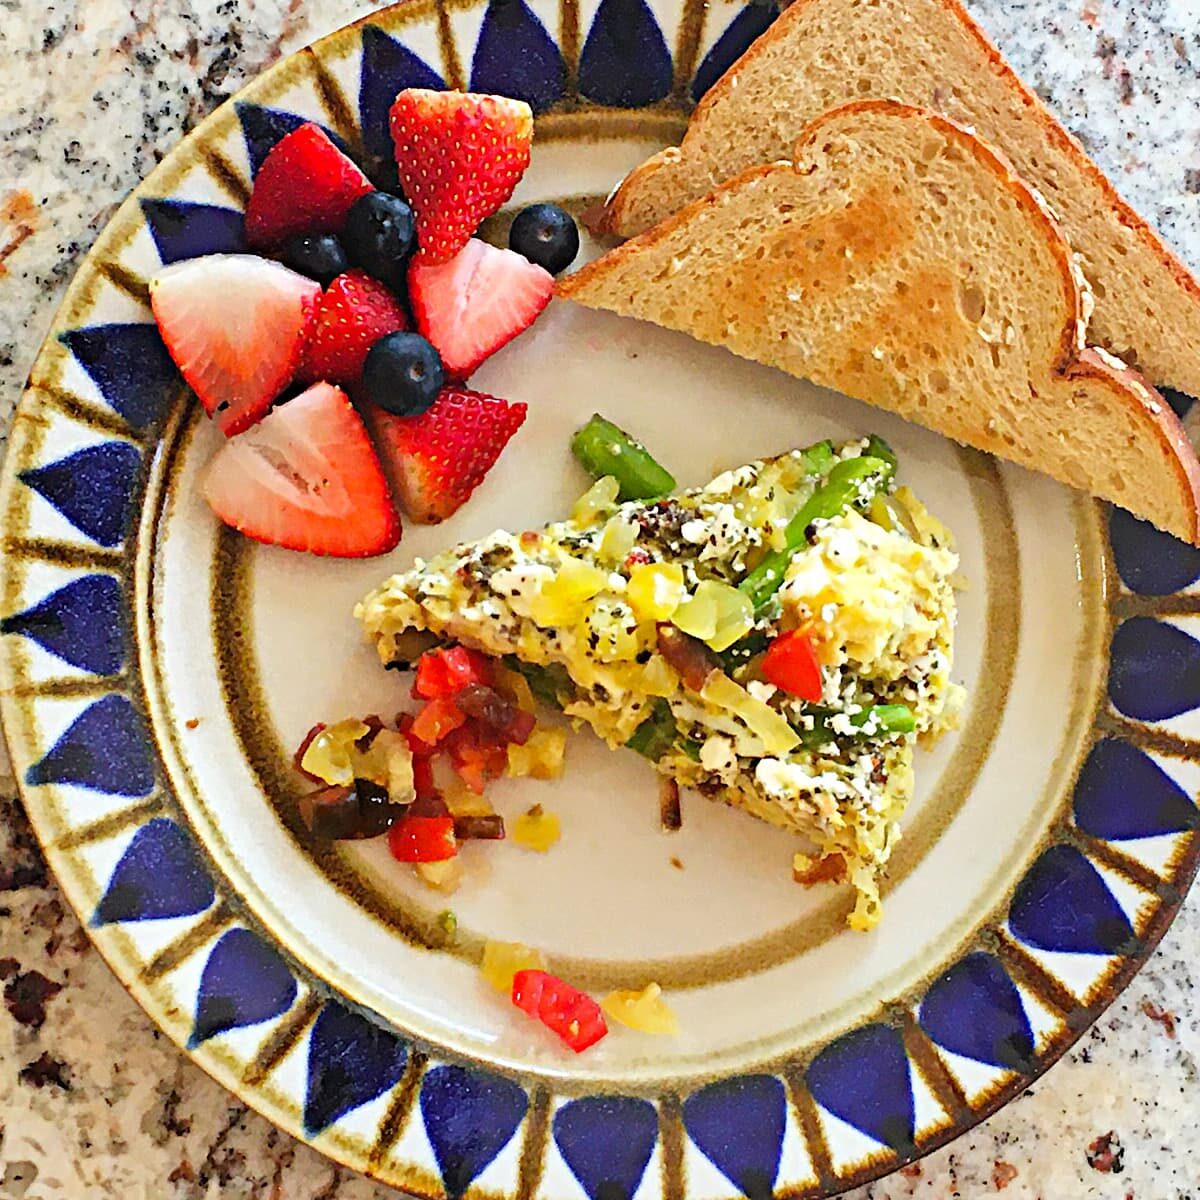 A slice of Asparagus frittata with tomato relish, and fruit on plate.